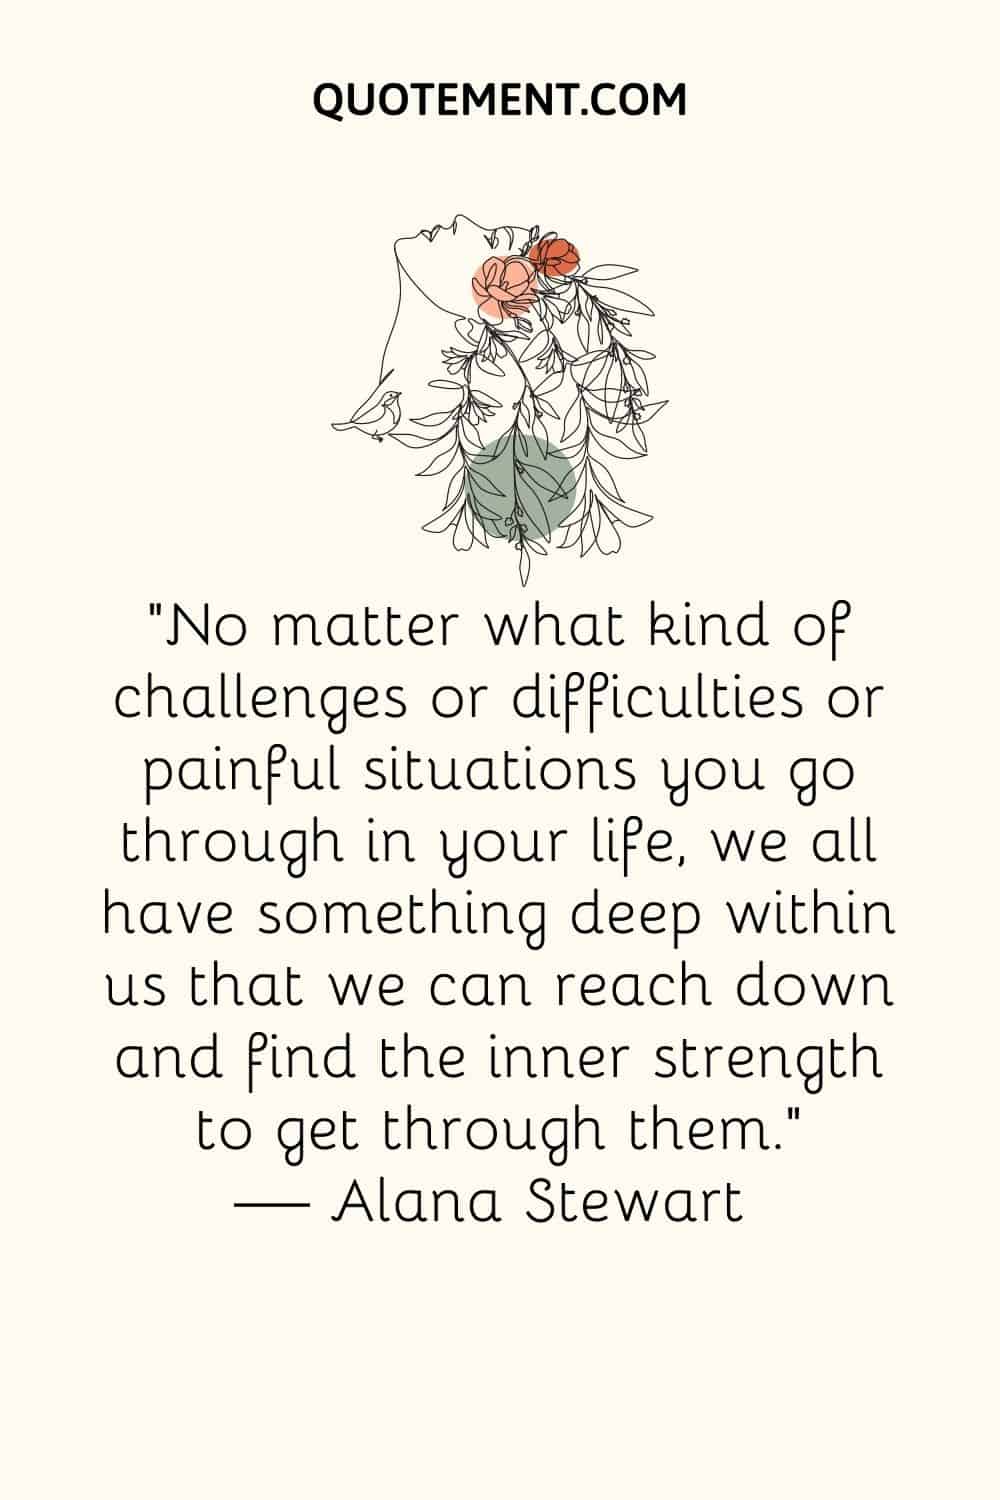 “No matter what kind of challenges or difficulties or painful situations you go through in your life